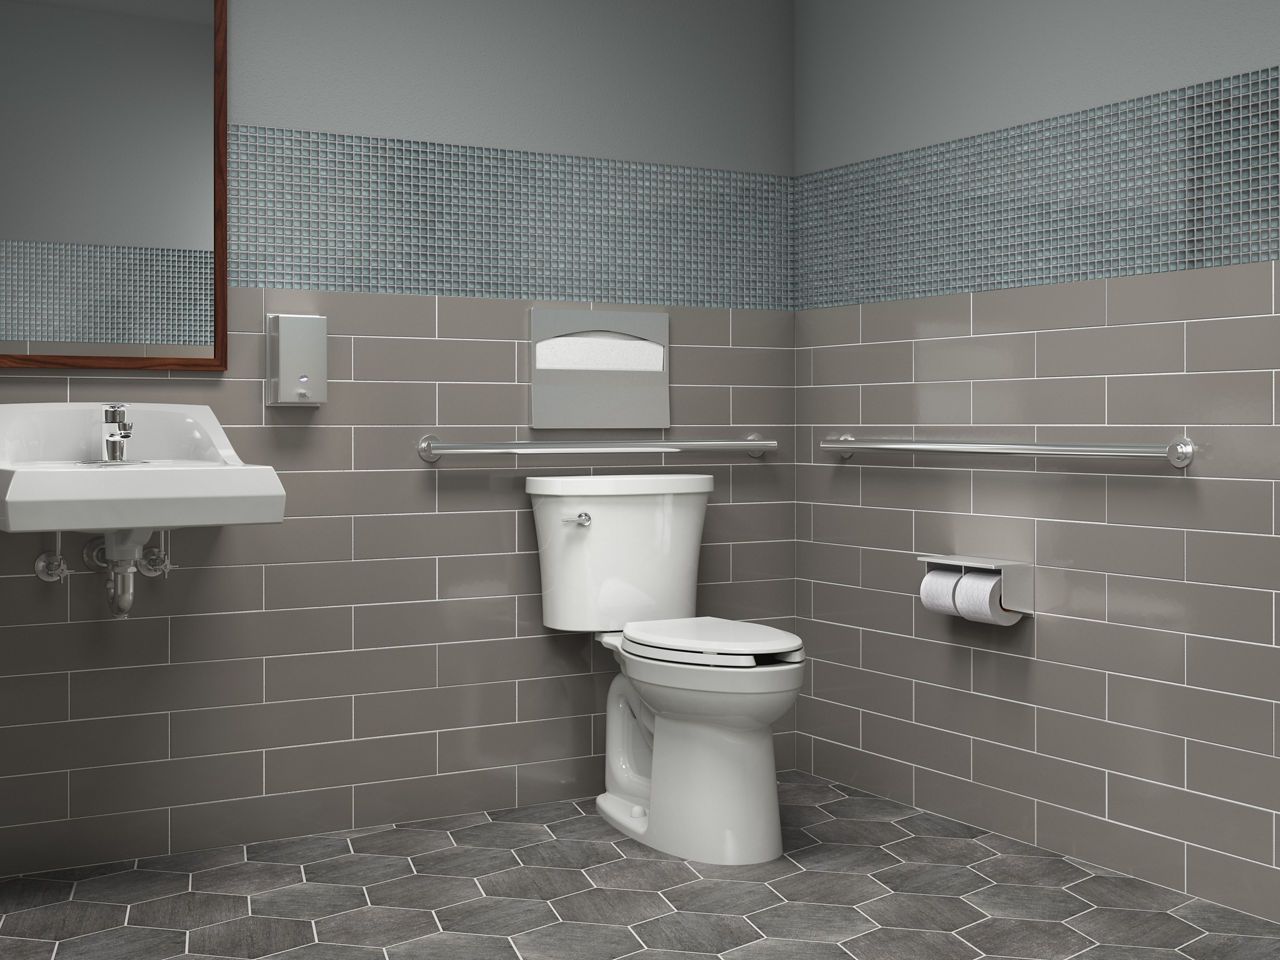 A commercial bathroom with KOHLER Kingston elongated floor-mount toilet and Purist grab bars.